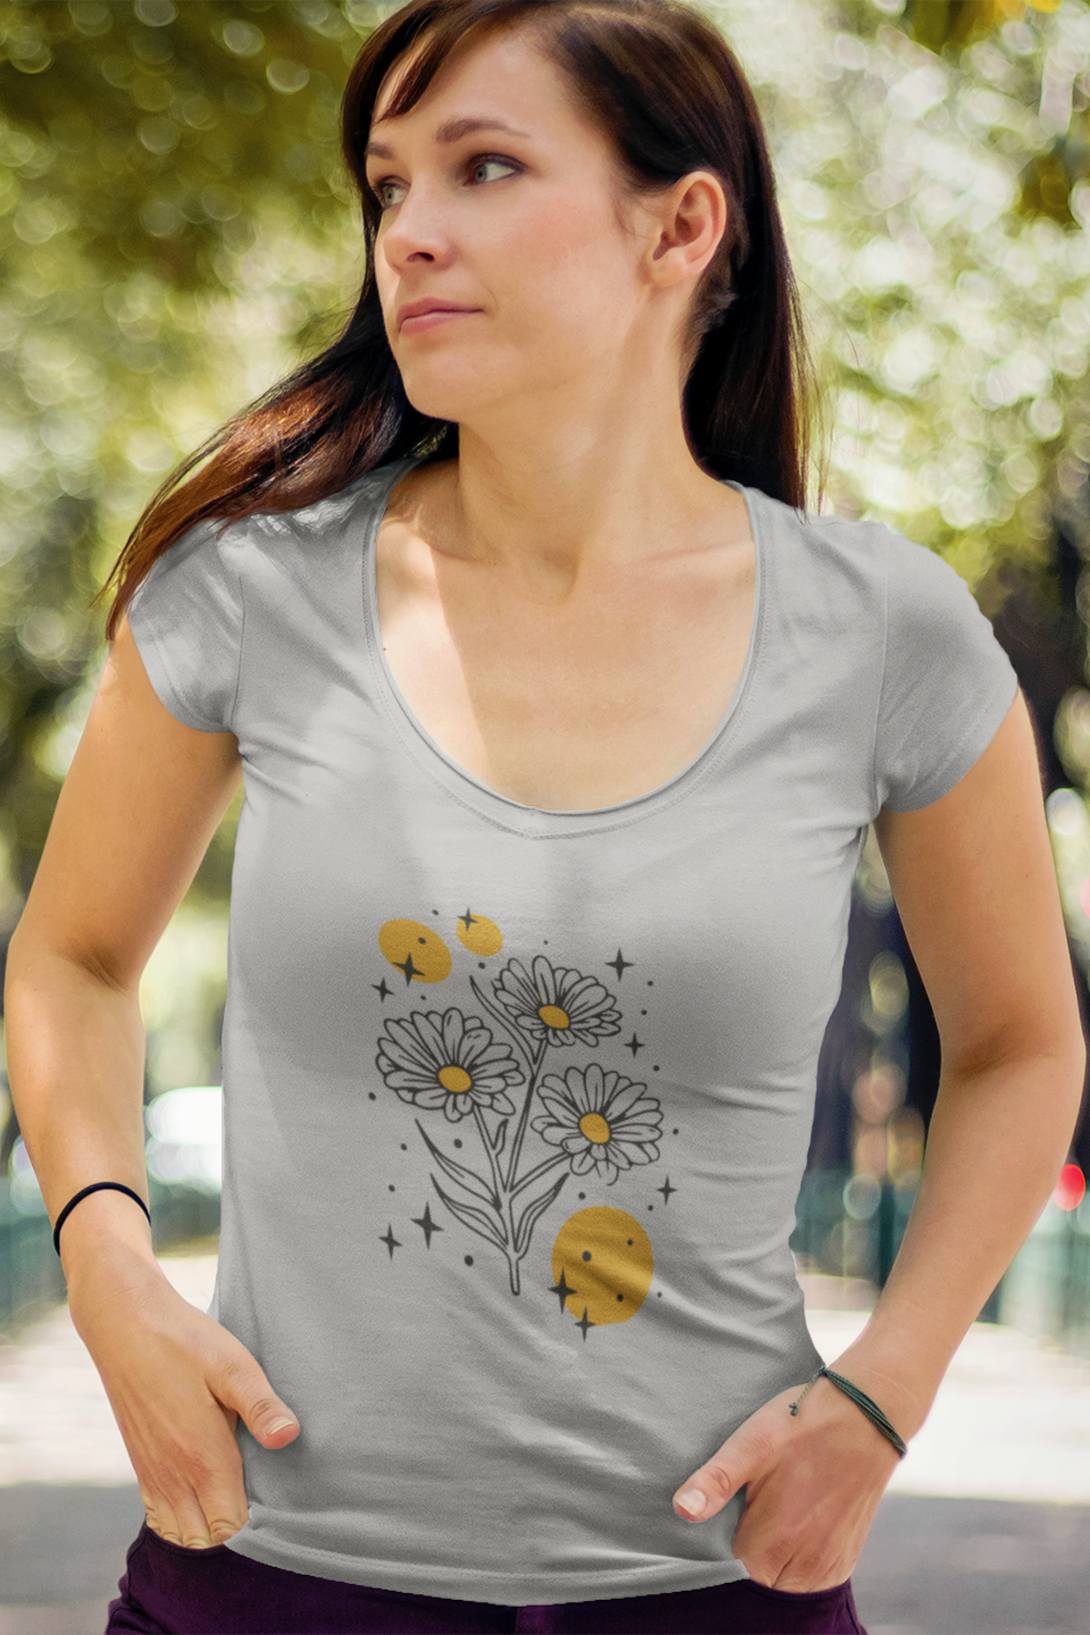 Sparkling Flowers Printed Scoop Neck T-Shirt For Women - WowWaves - 2